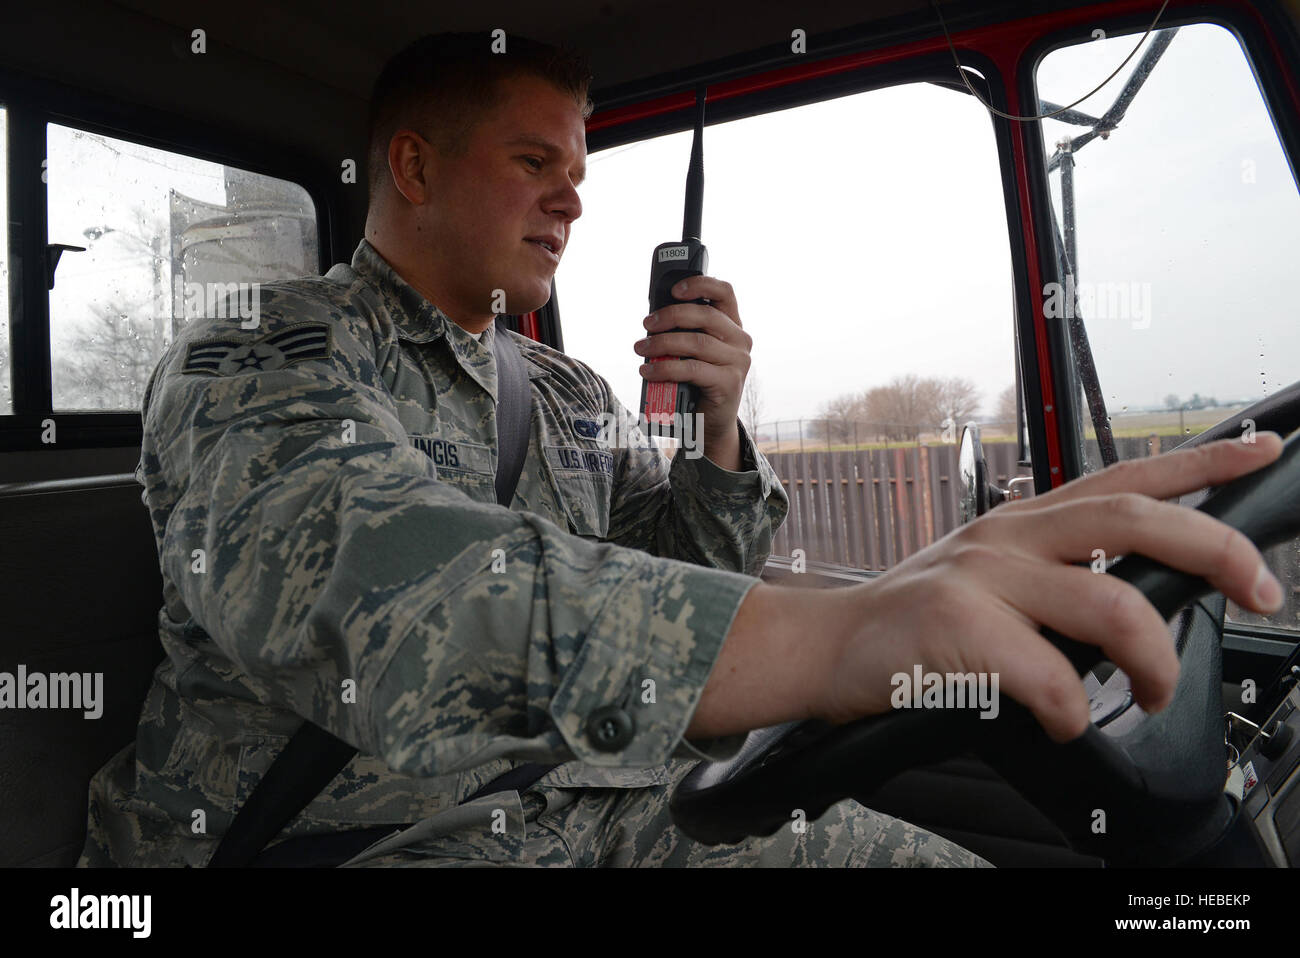 Senior Airman Dainius Milingis, 375th Logistics Readiness Squadron Vehicle Operator, communicates with a fellow vehicle operator in the work yard before driving a flatbed truck, Scott Air Force Base, Ill., March 24, 2015. Milingis serves the base by supplying vehicles to government license holders, ensuring transportation is provided to tour groups and providing government vehicle assistance, such as towing if necessary. (U.S. Air Force photo by Airman 1st Class Erica Crossen) Stock Photo